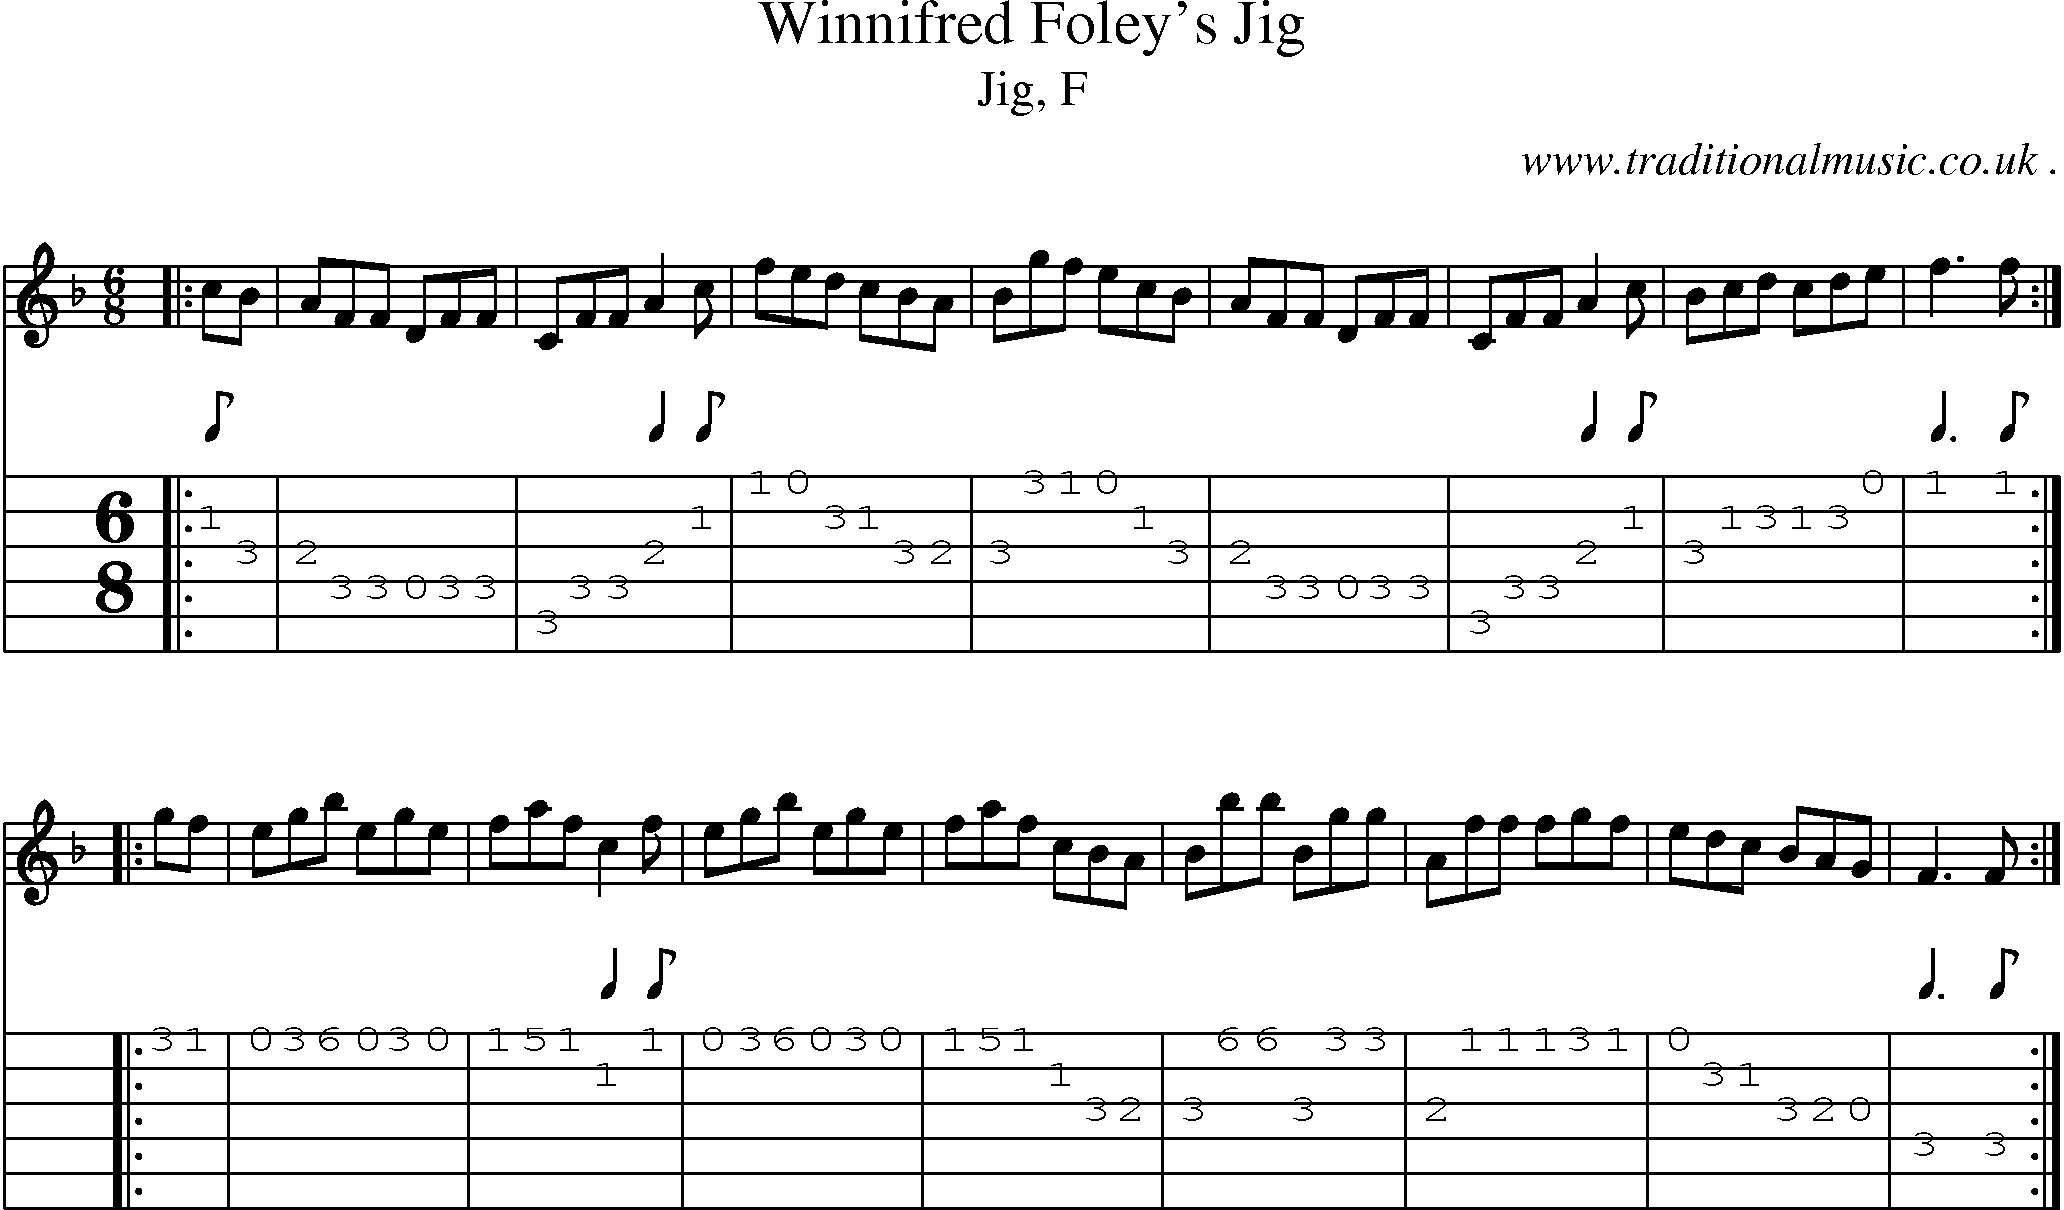 Sheet-music  score, Chords and Guitar Tabs for Winnifred Foleys Jig